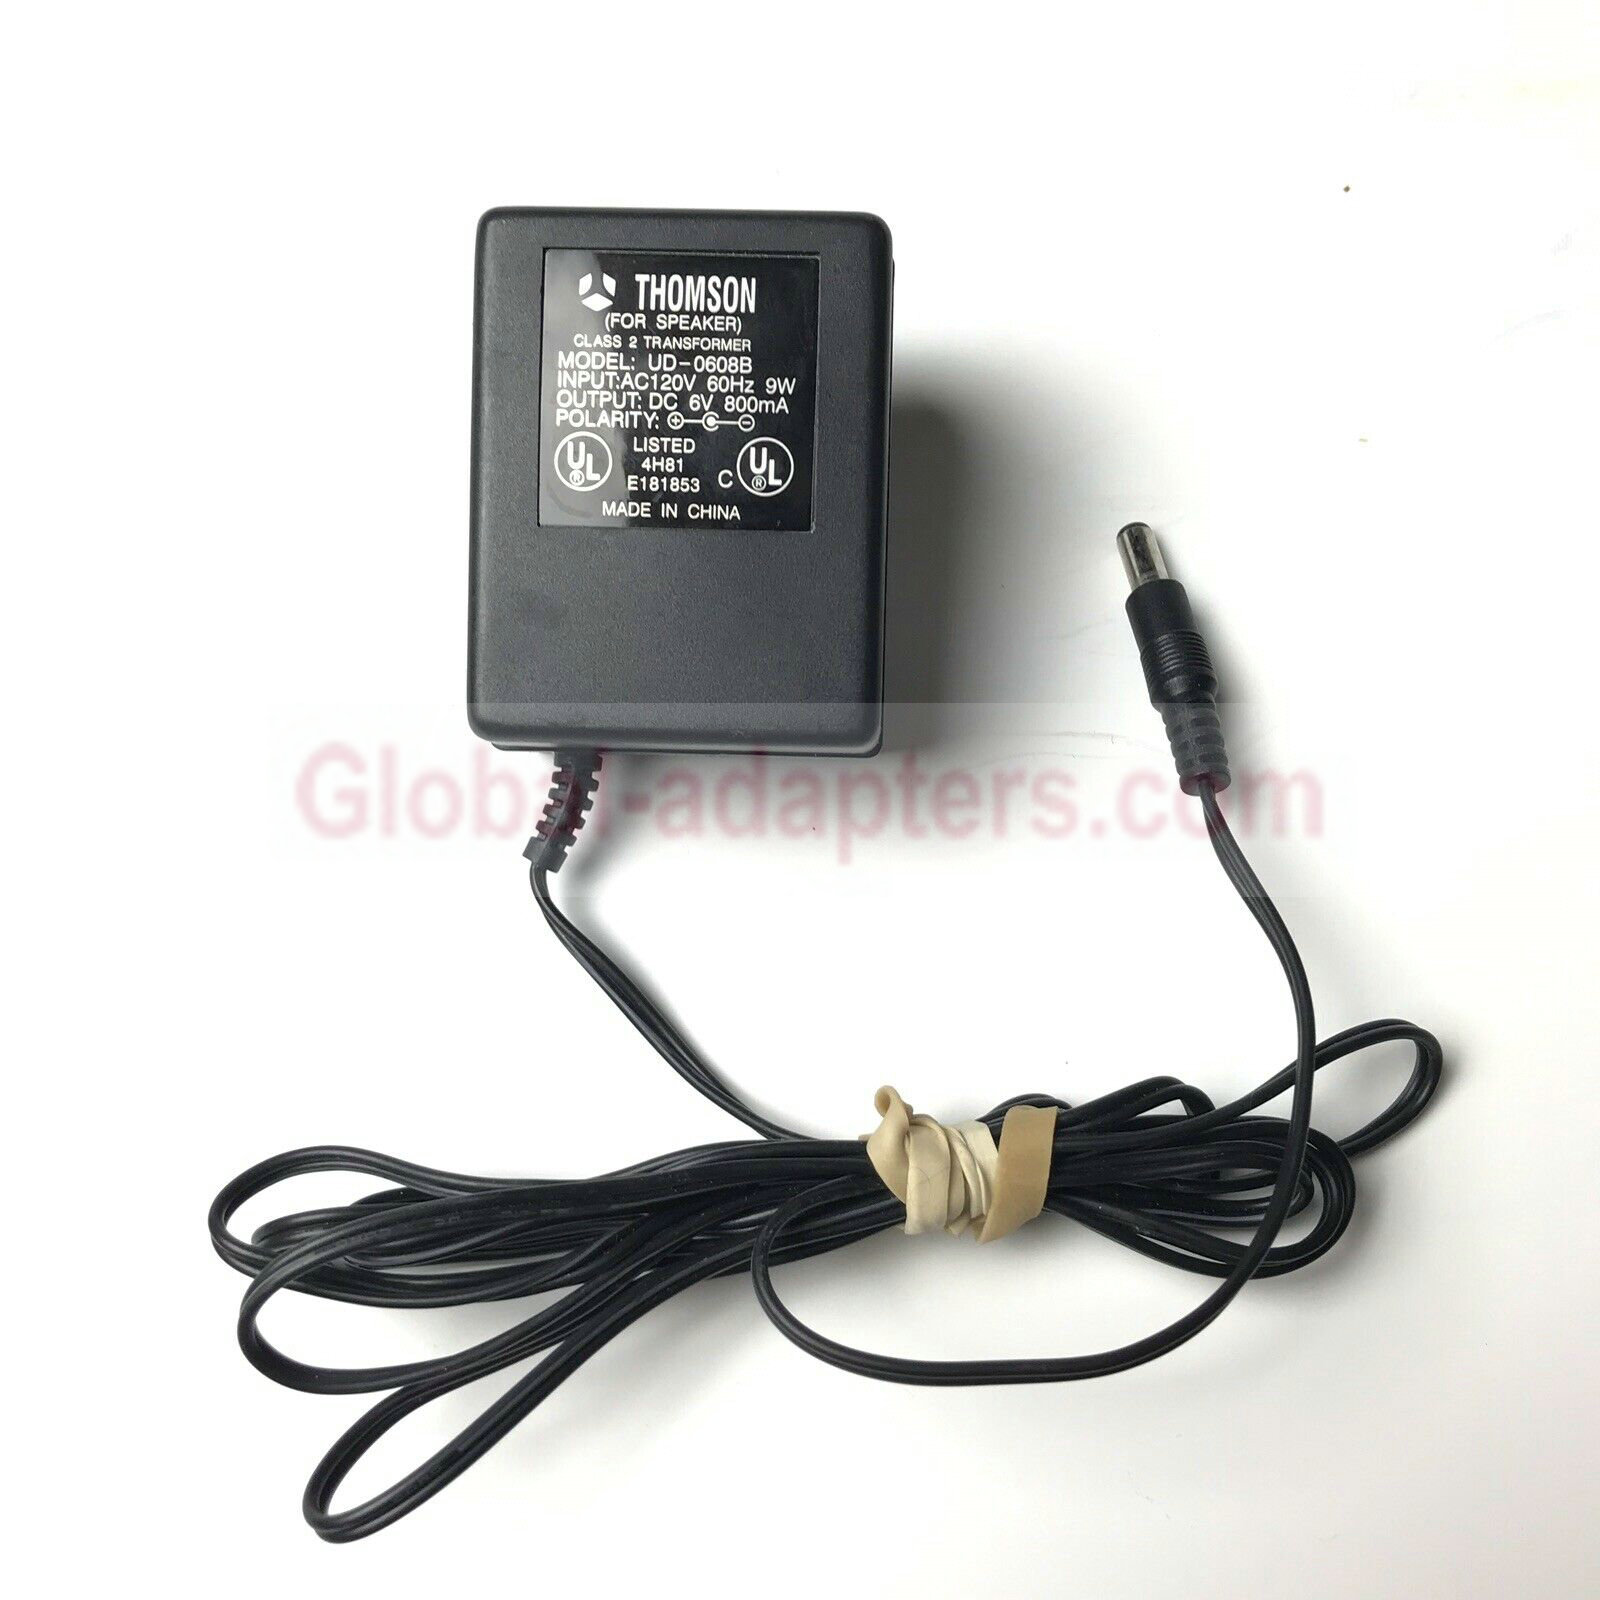 New DC6V 800mA Thomson UD-0608B RCA WSP150 Wireless Speaker Power Supply AC ADAPTER - Click Image to Close